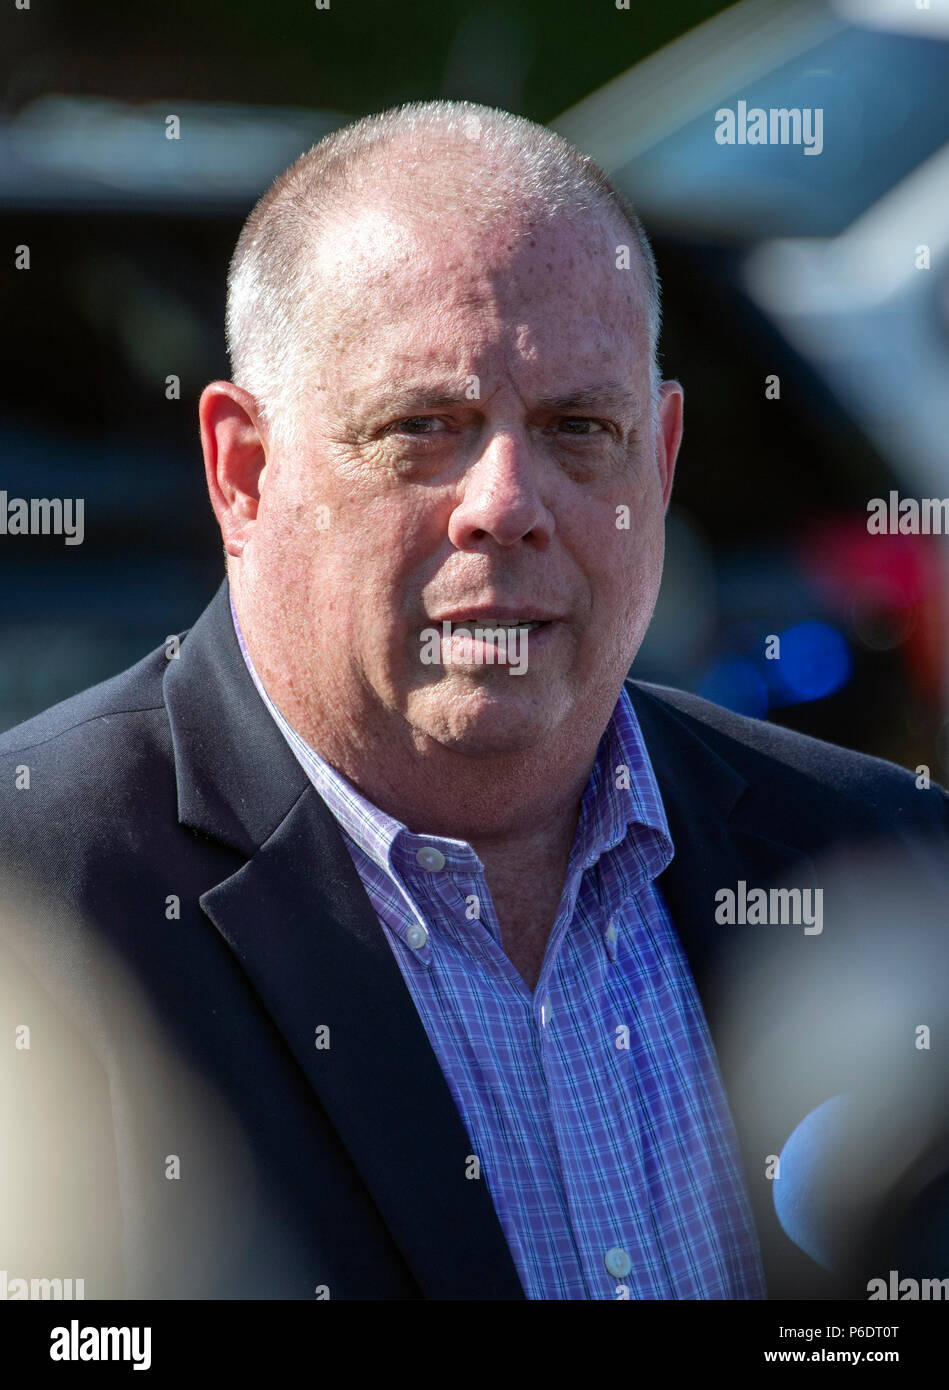 Governor Larry Hogan (Republican of Maryland) speaks to reporters after a gunman opened fire the Capital Gazette newspaper killing five people and injuring many others on Thursday, June 28, 2018. Credit: Ron Sachs/CNP/MediaPunch (RESTRICTION: NO New York or New Jersey Newspapers or newspapers within a 75 mile radius of New York City) /MediaPunch Stock Photo